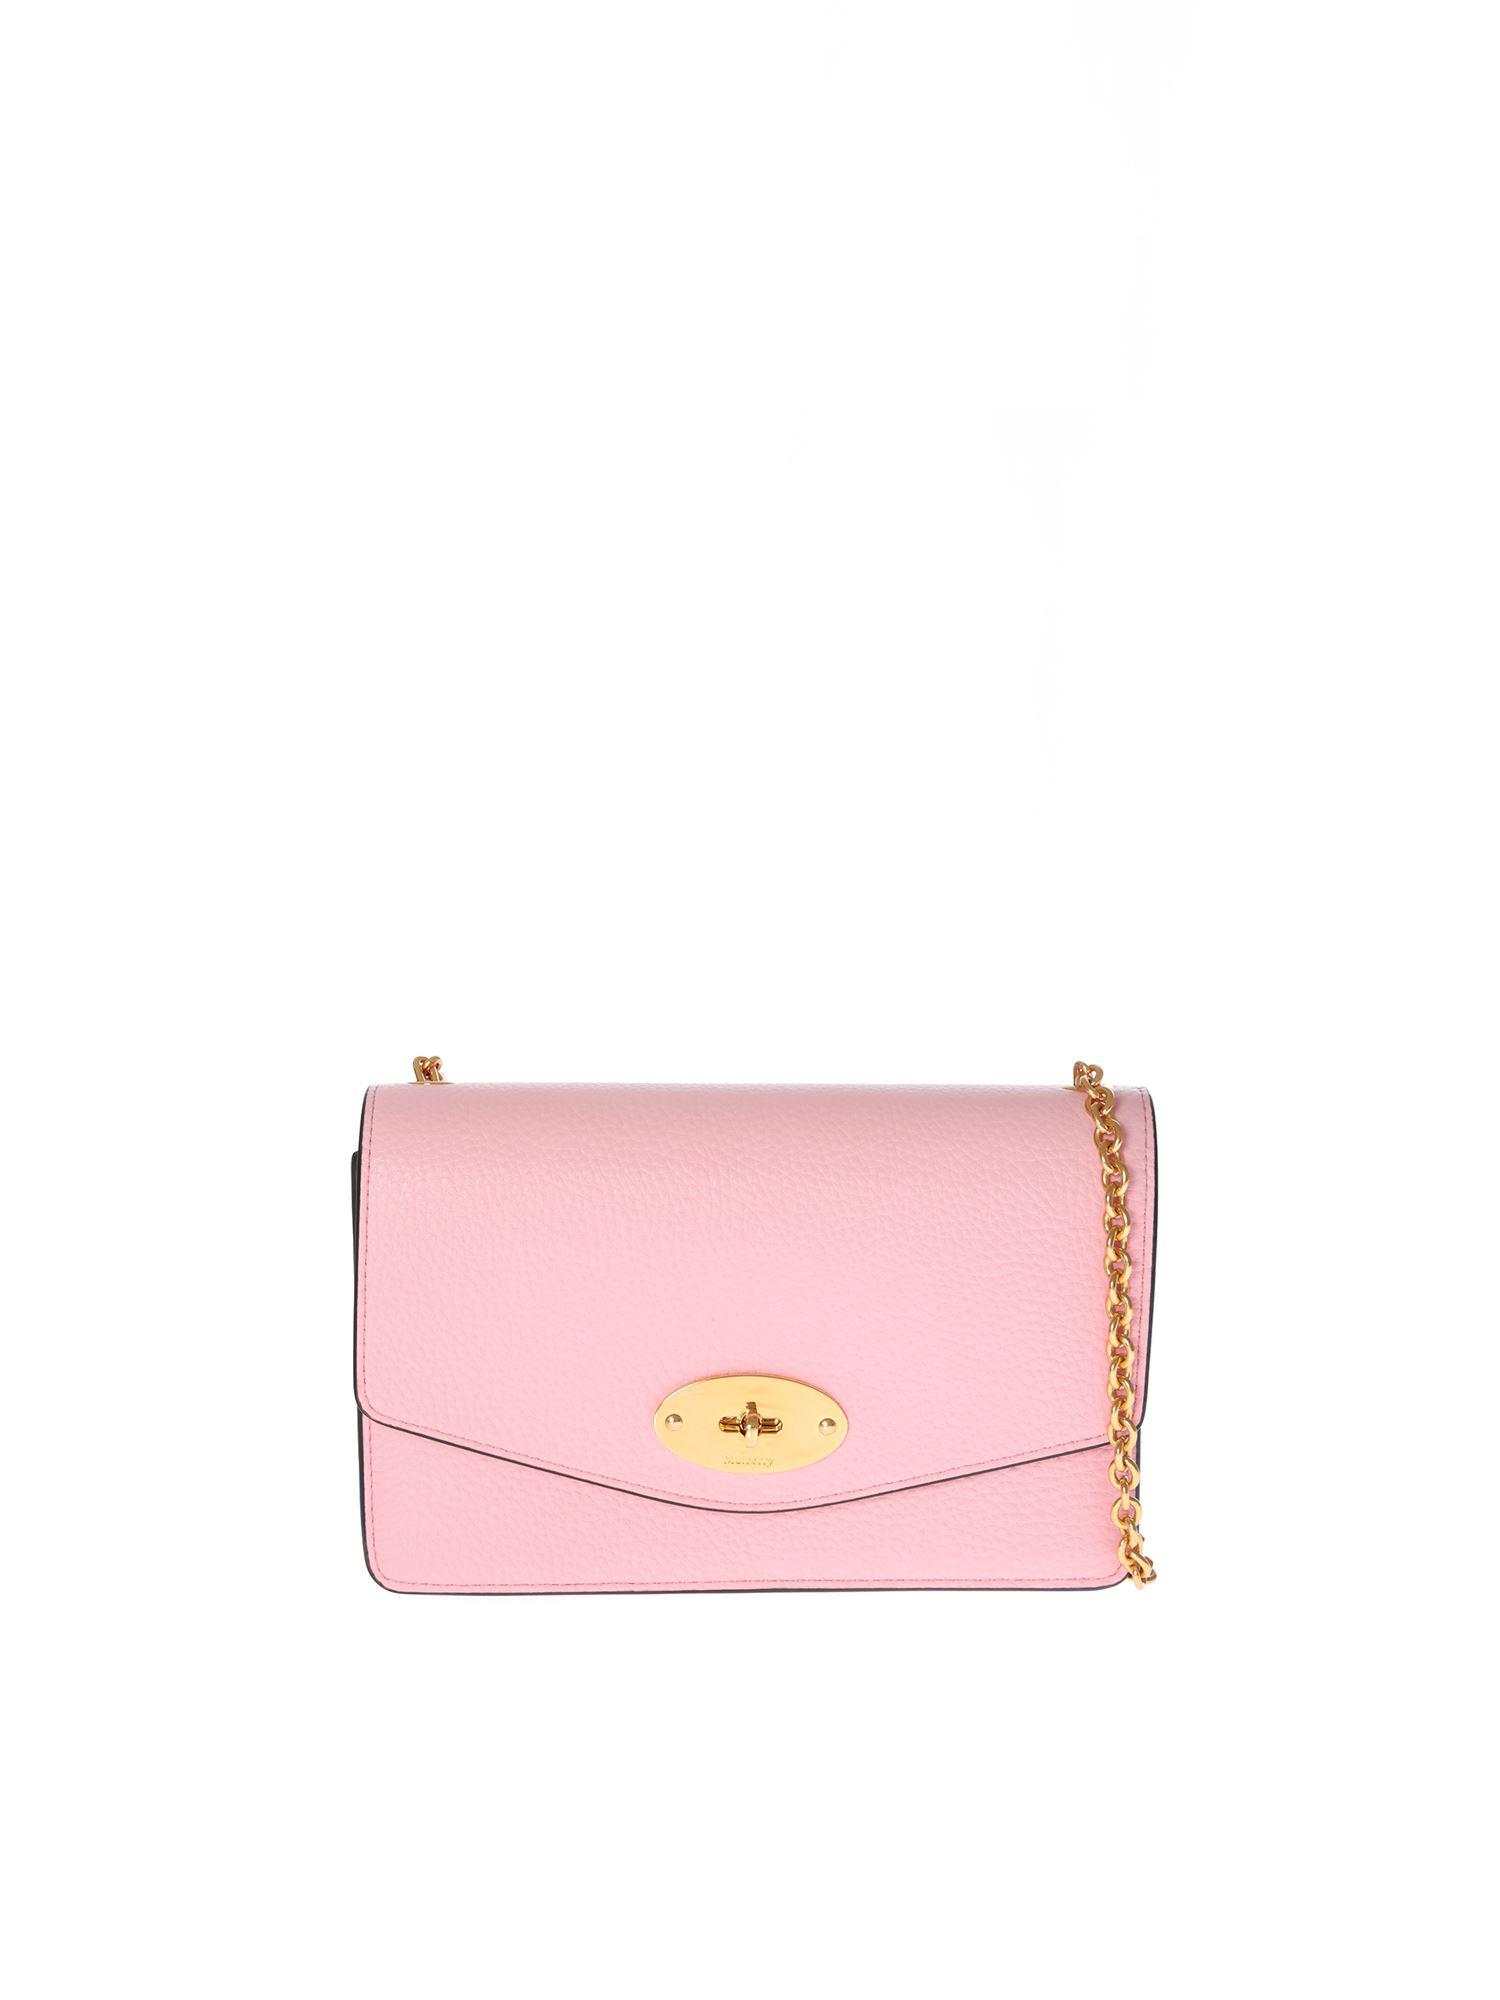 Mulberry Leather Small Darley Pink Bag - Lyst